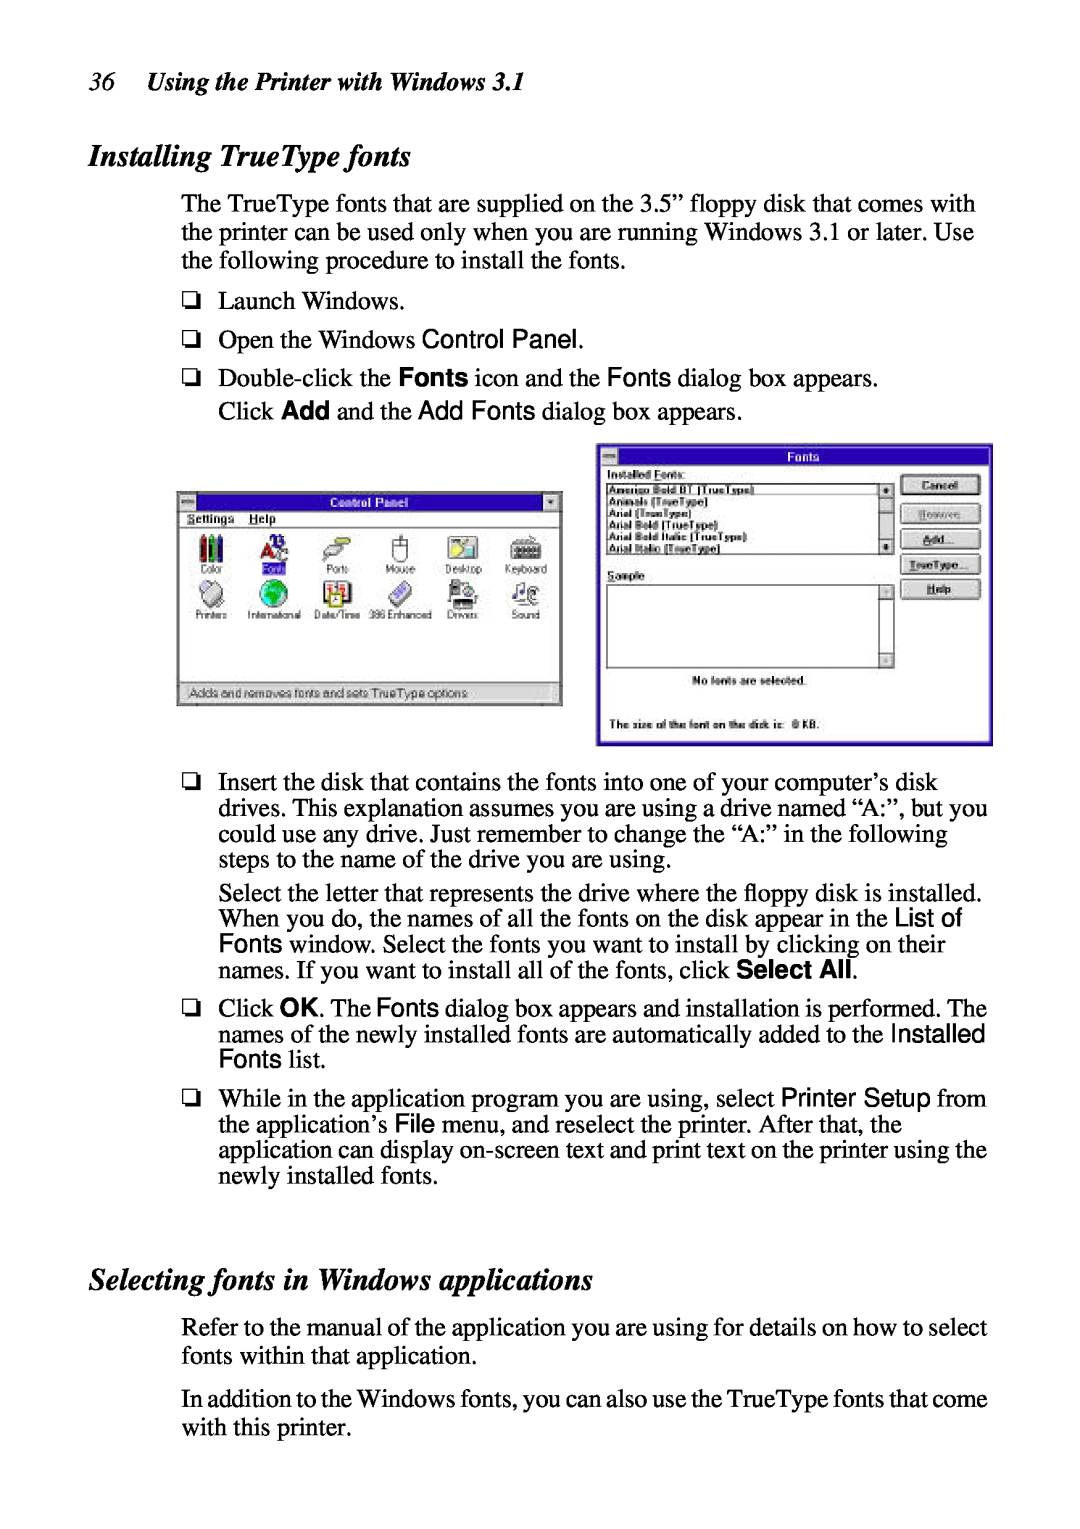 Star Micronics NX-2460 Installing TrueType fonts, Selecting fonts in Windows applications, Using the Printer with Windows 